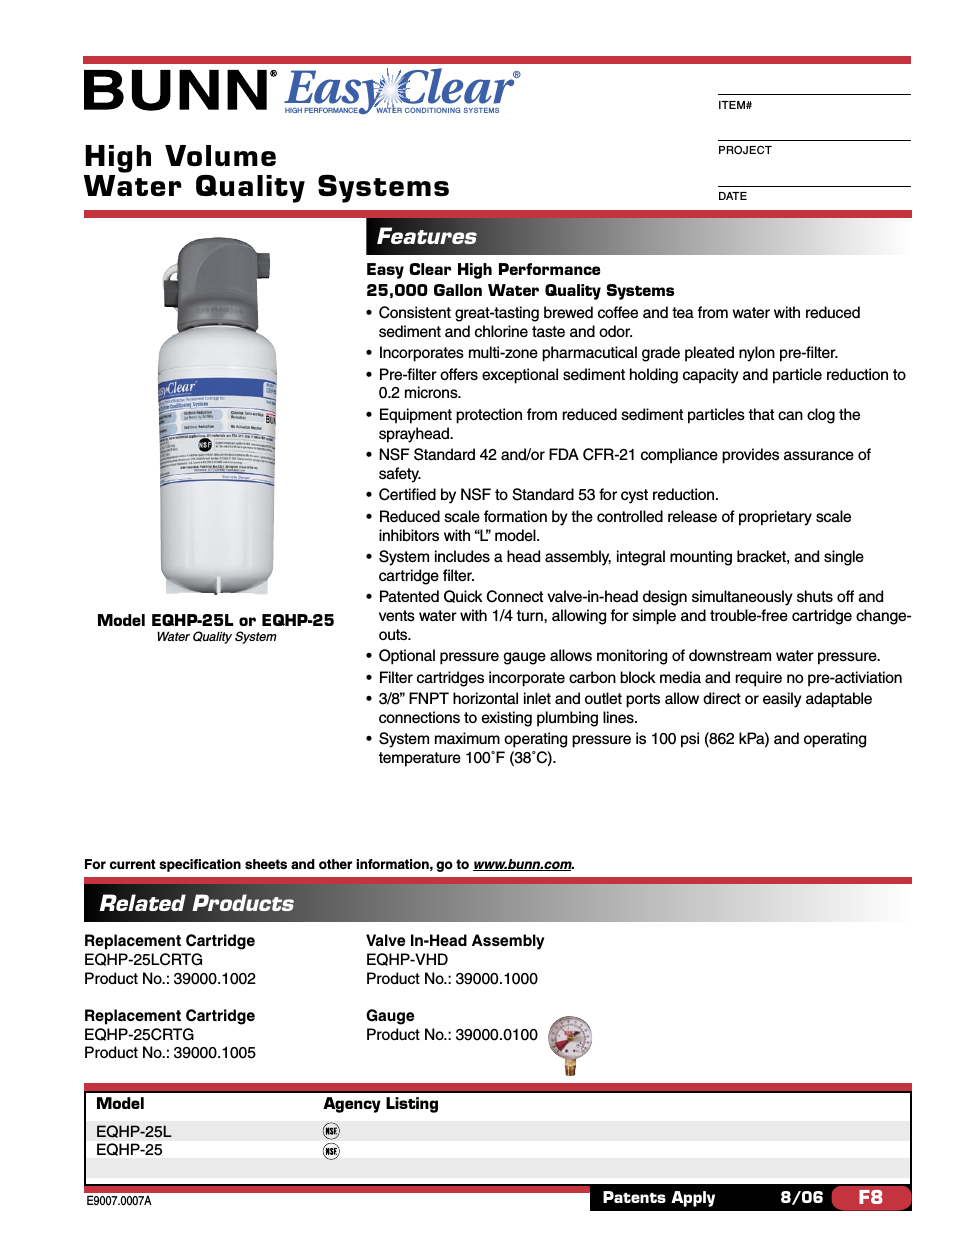 WATER QUALITY SYSTEM EQHP-25